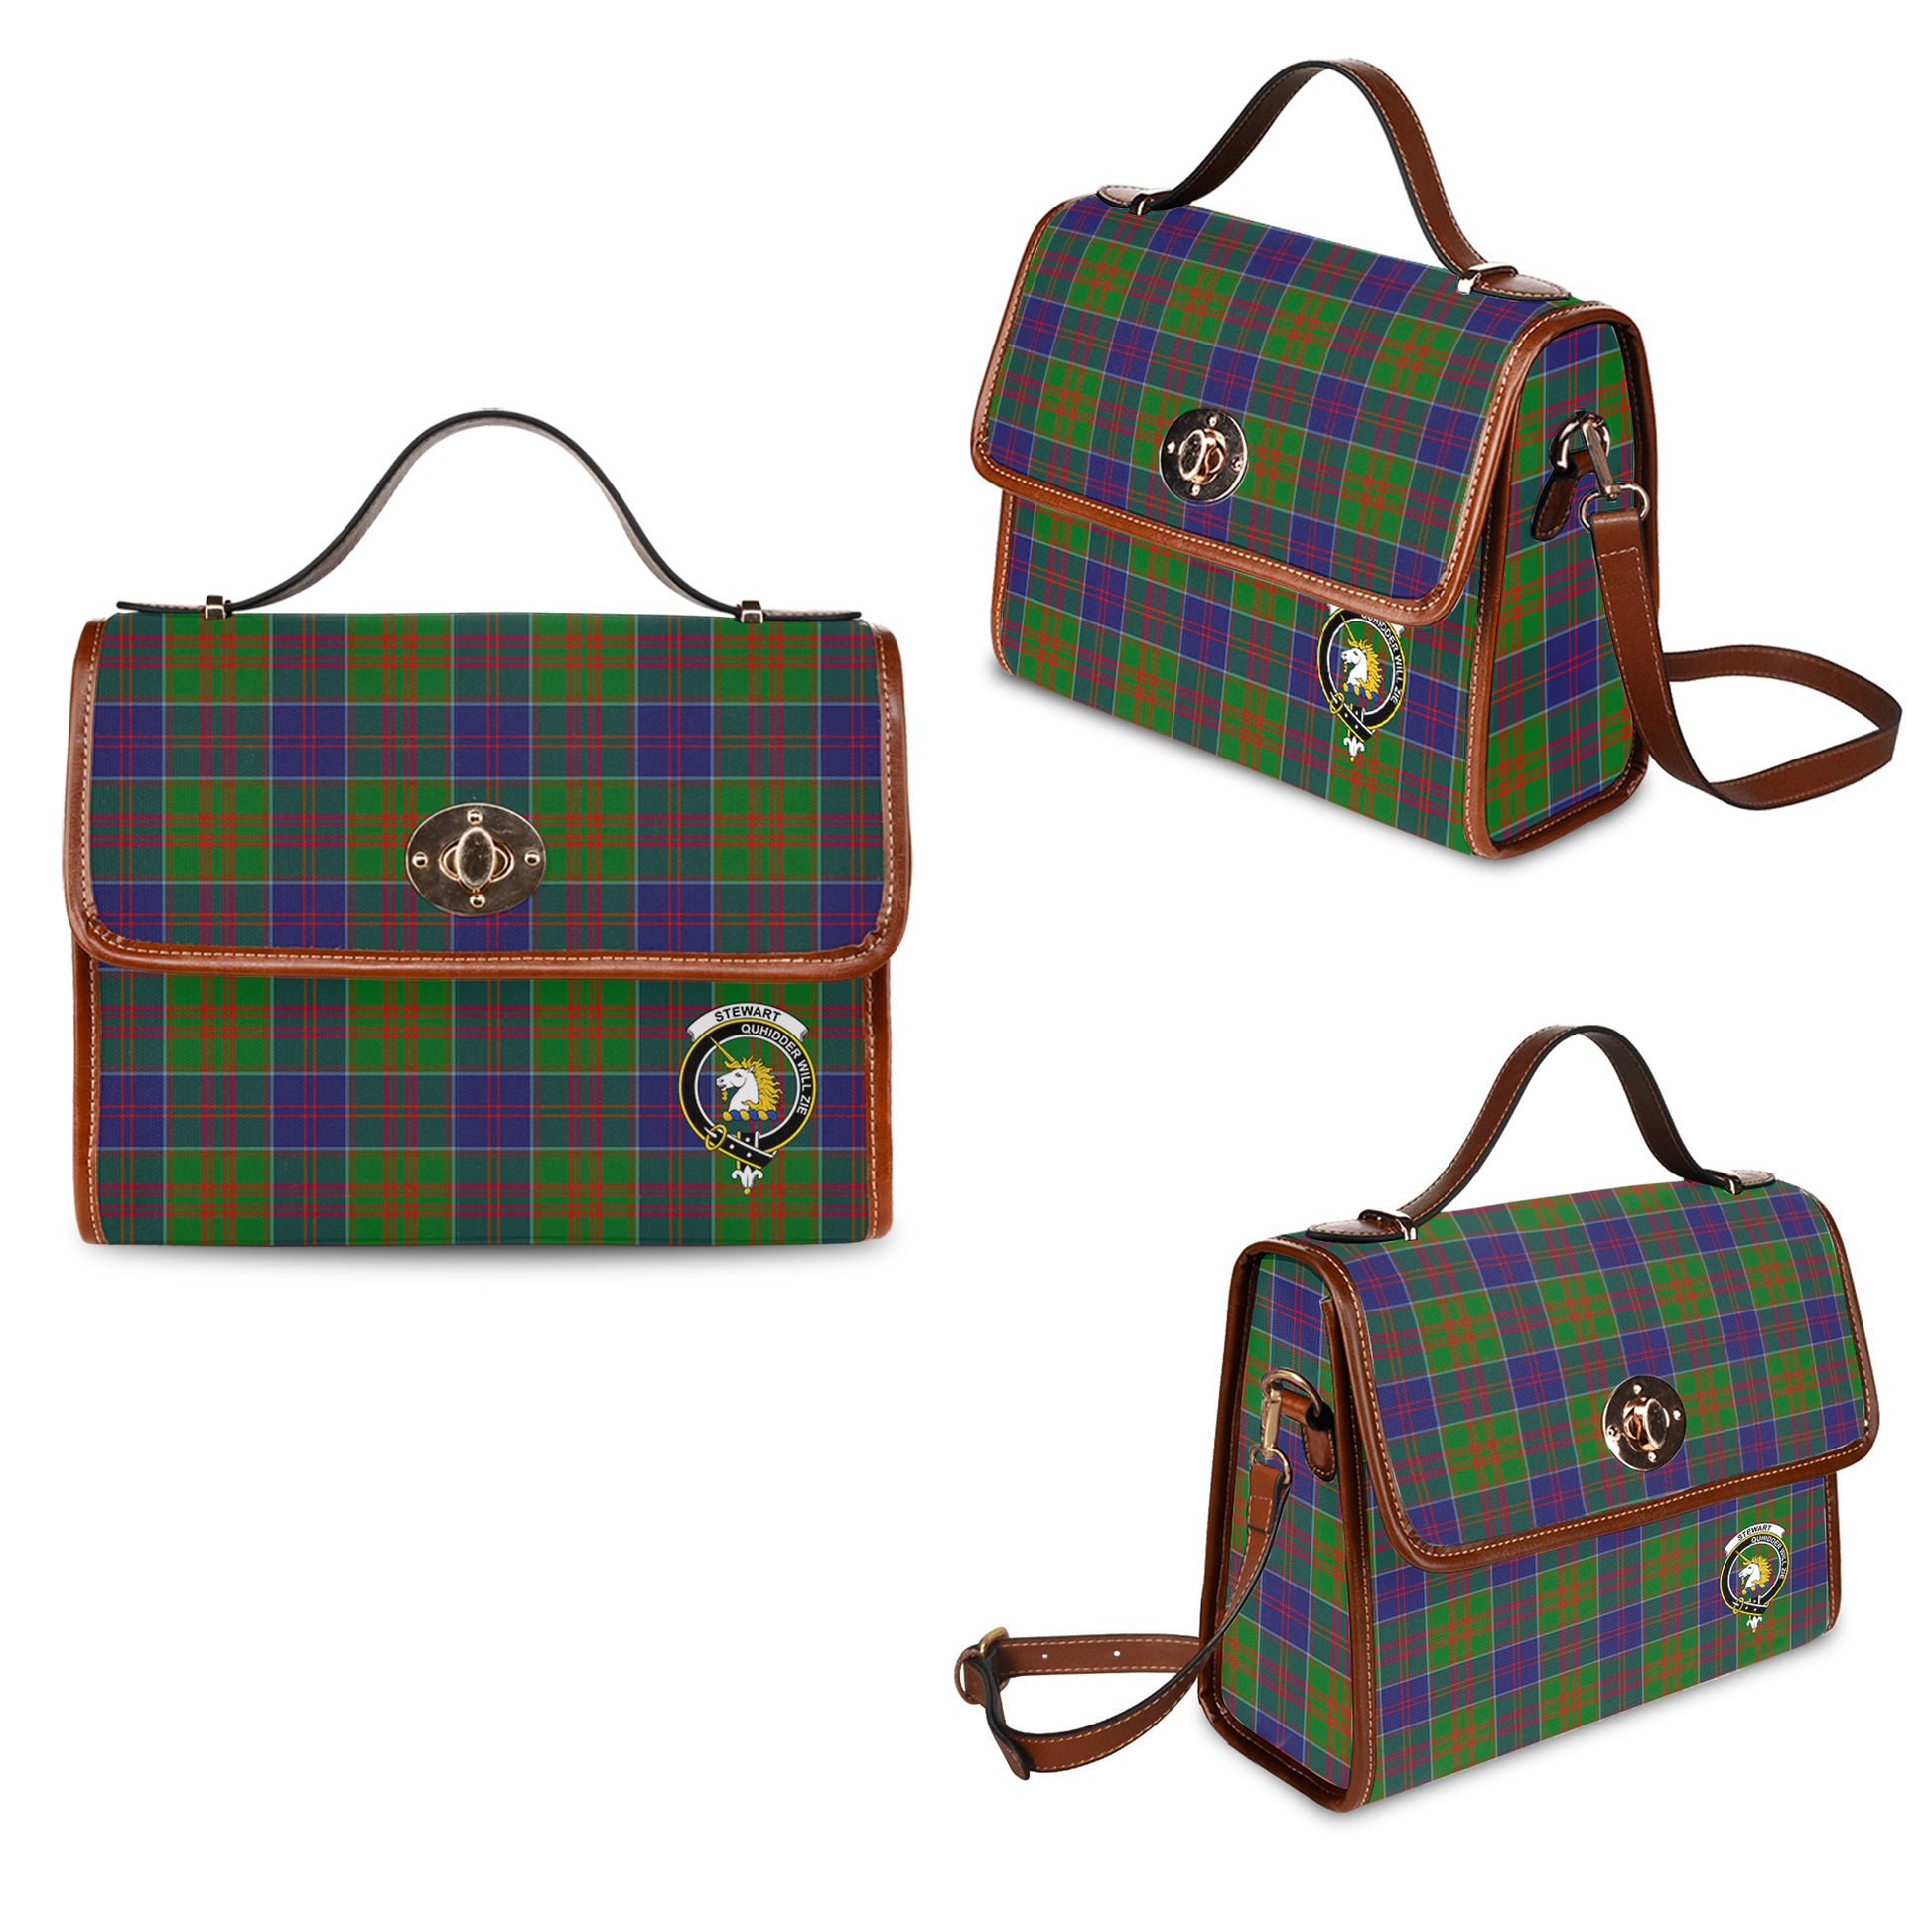 Stewart of Appin Hunting Modern Tartan Leather Strap Waterproof Canvas Bag with Family Crest One Size 34cm * 42cm (13.4" x 16.5") - Tartanvibesclothing